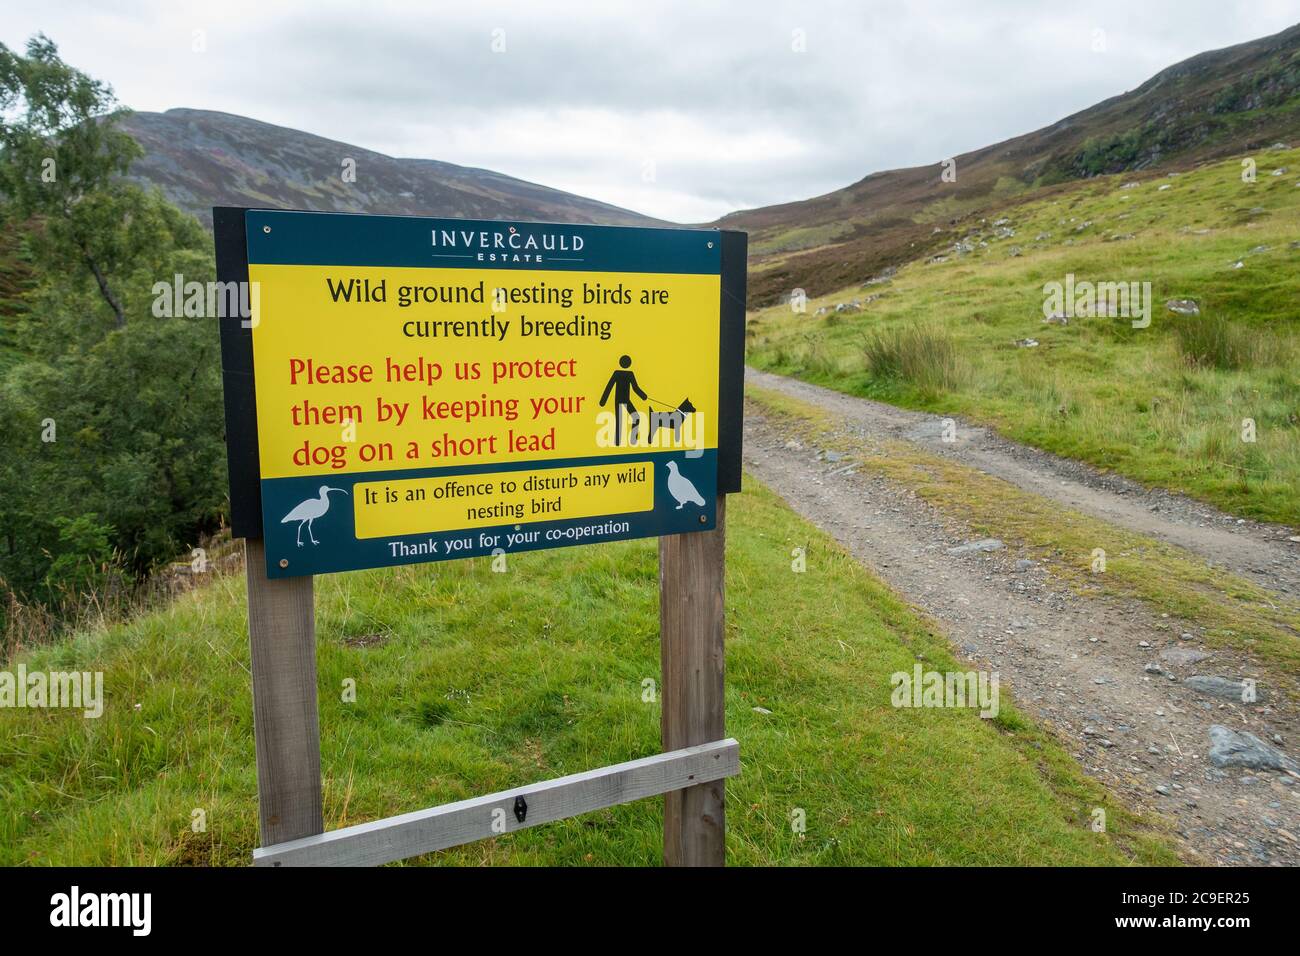 Sign telling dog walkers to keep dogs on leads due to nesting birds on the Jock's Road, Invercauld Estate near Braemar in Scotland, UK. Stock Photo